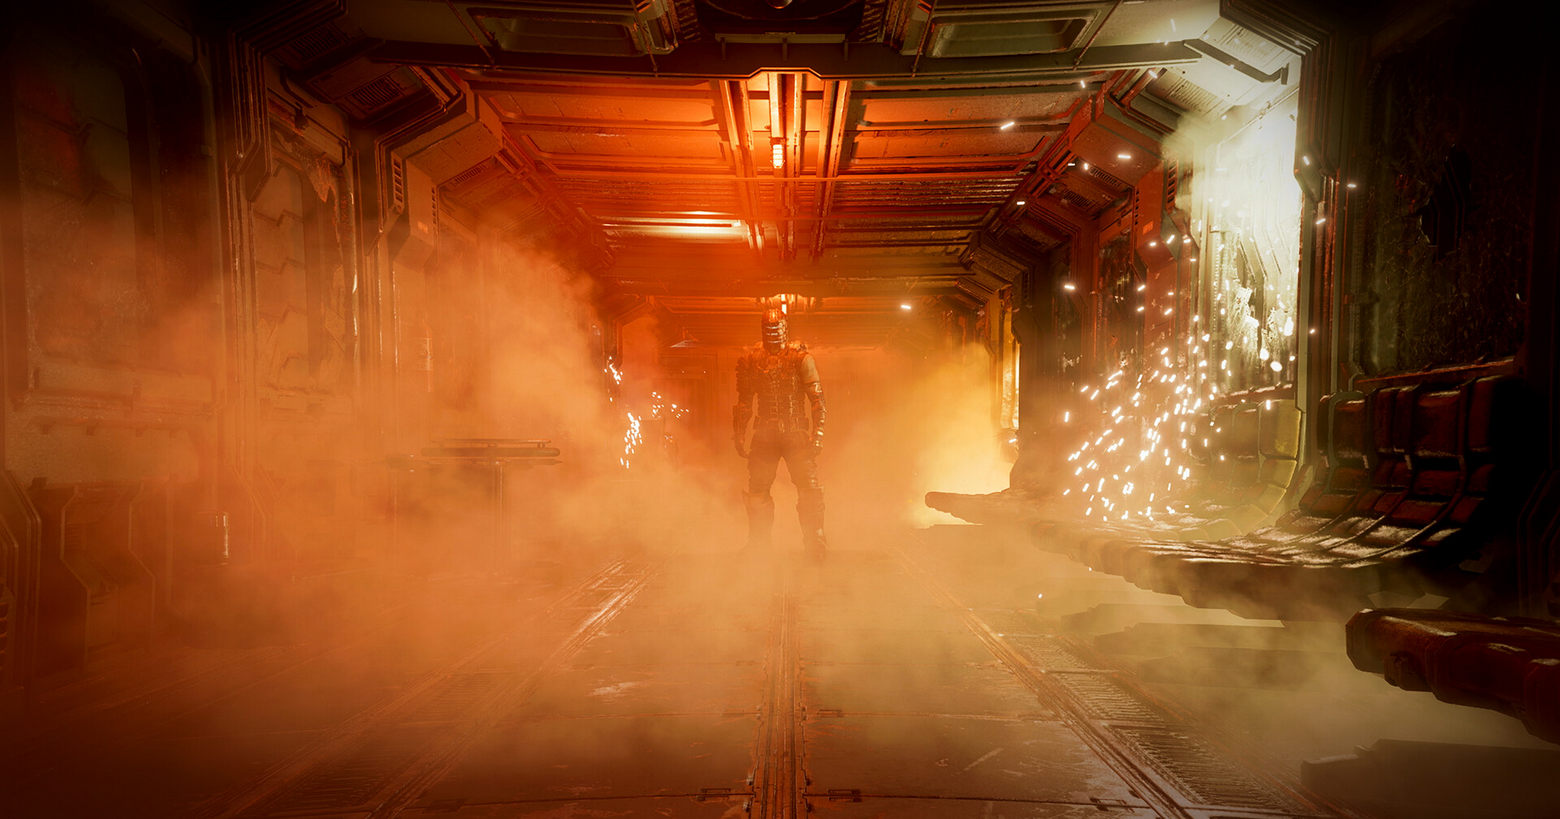 This screenshot shows a scene from the Dead Space Remake. We are on board a spaceship and are standing in the middle of a long corridor, which just runs into the background and is illuminated by an orange ceiling light. A lot of smoke is in this corridor. On the right side of the wall is an electrical device, which seems to be defective and from which a lot of sparks and smoke are coming out. At the end of the corridor, we catch a glimpse of the protagonist, Isaac Clarke, in a long shot, standing directly facing us. He has a dark combat suit and a very futuristic-looking helmet that consists of three glowing horizontal lines running parallel around the helmet. The game's release date is set and it will also be available for EA Play for free.